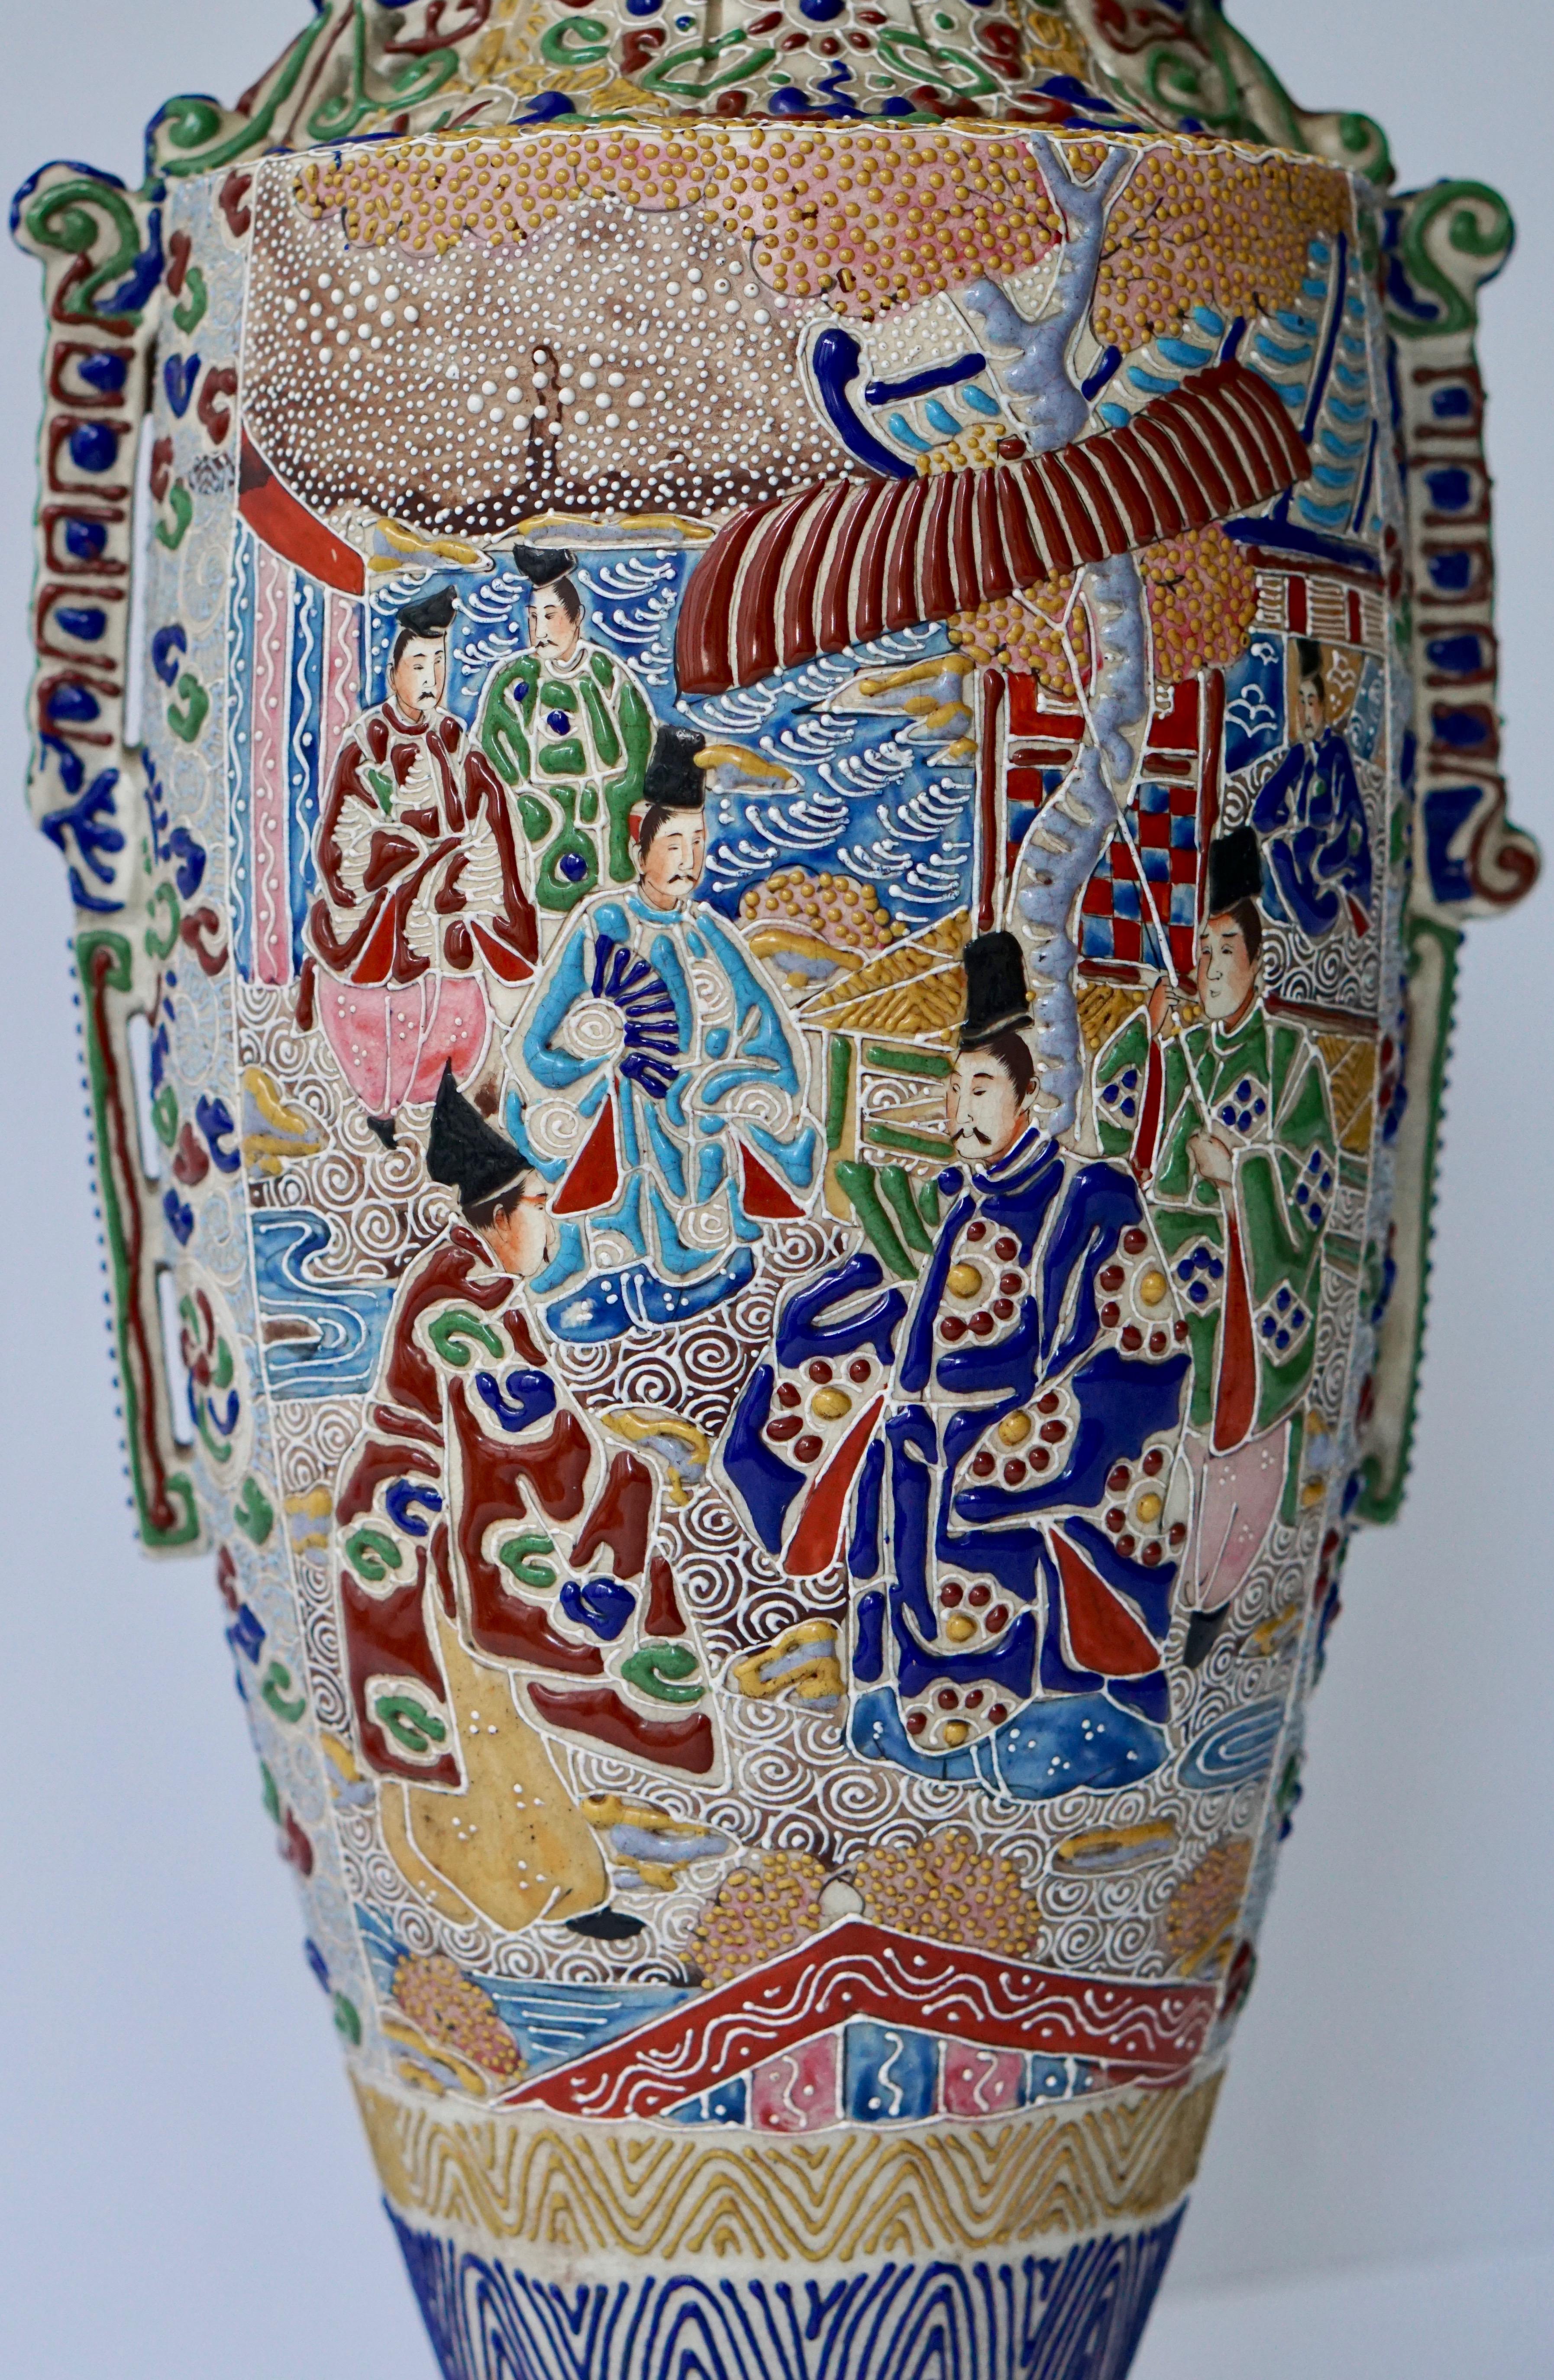 A mid-20th century Japanese Satsuma vase with figures.

 Satsuma ware is a style of Japanese earthenware originally from the Satsuma region of what is today southern Kyushu. There are two distinct categories of this ware: The original plain dark